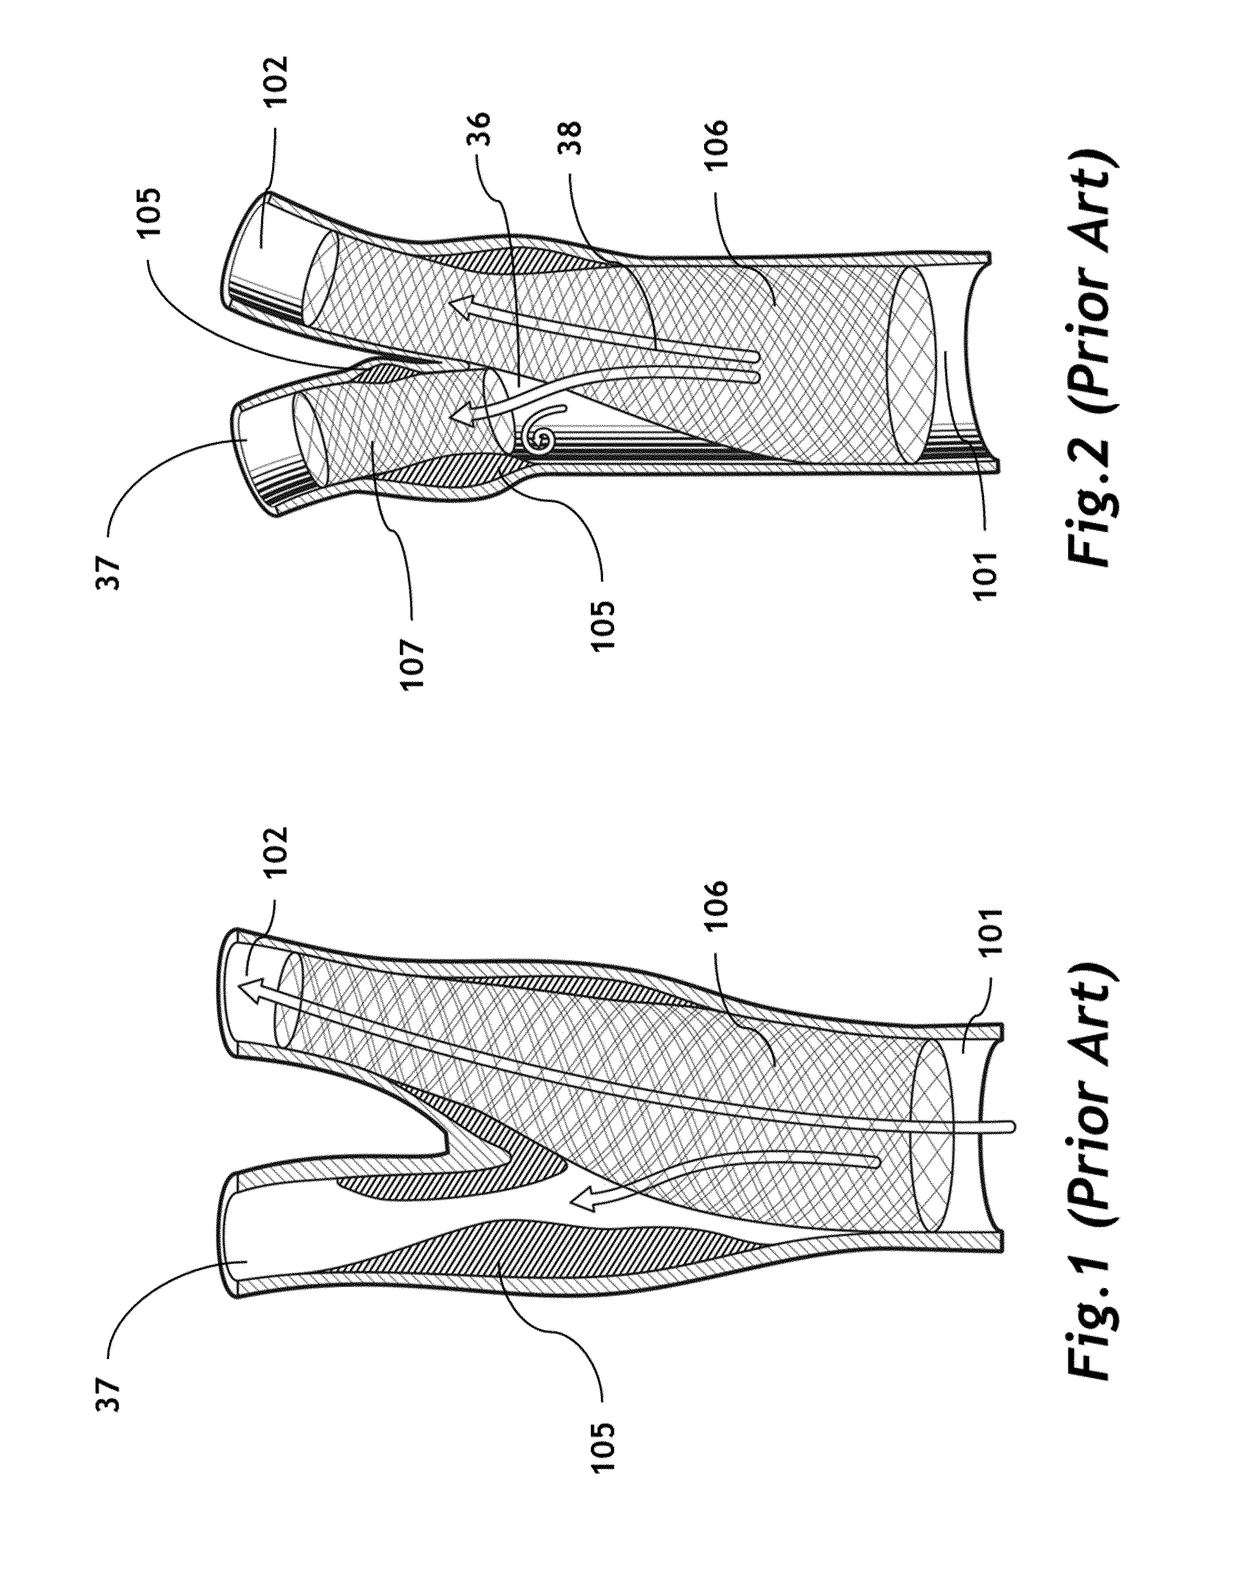 Bifurcated 3D filter assembly for prevention of stroke